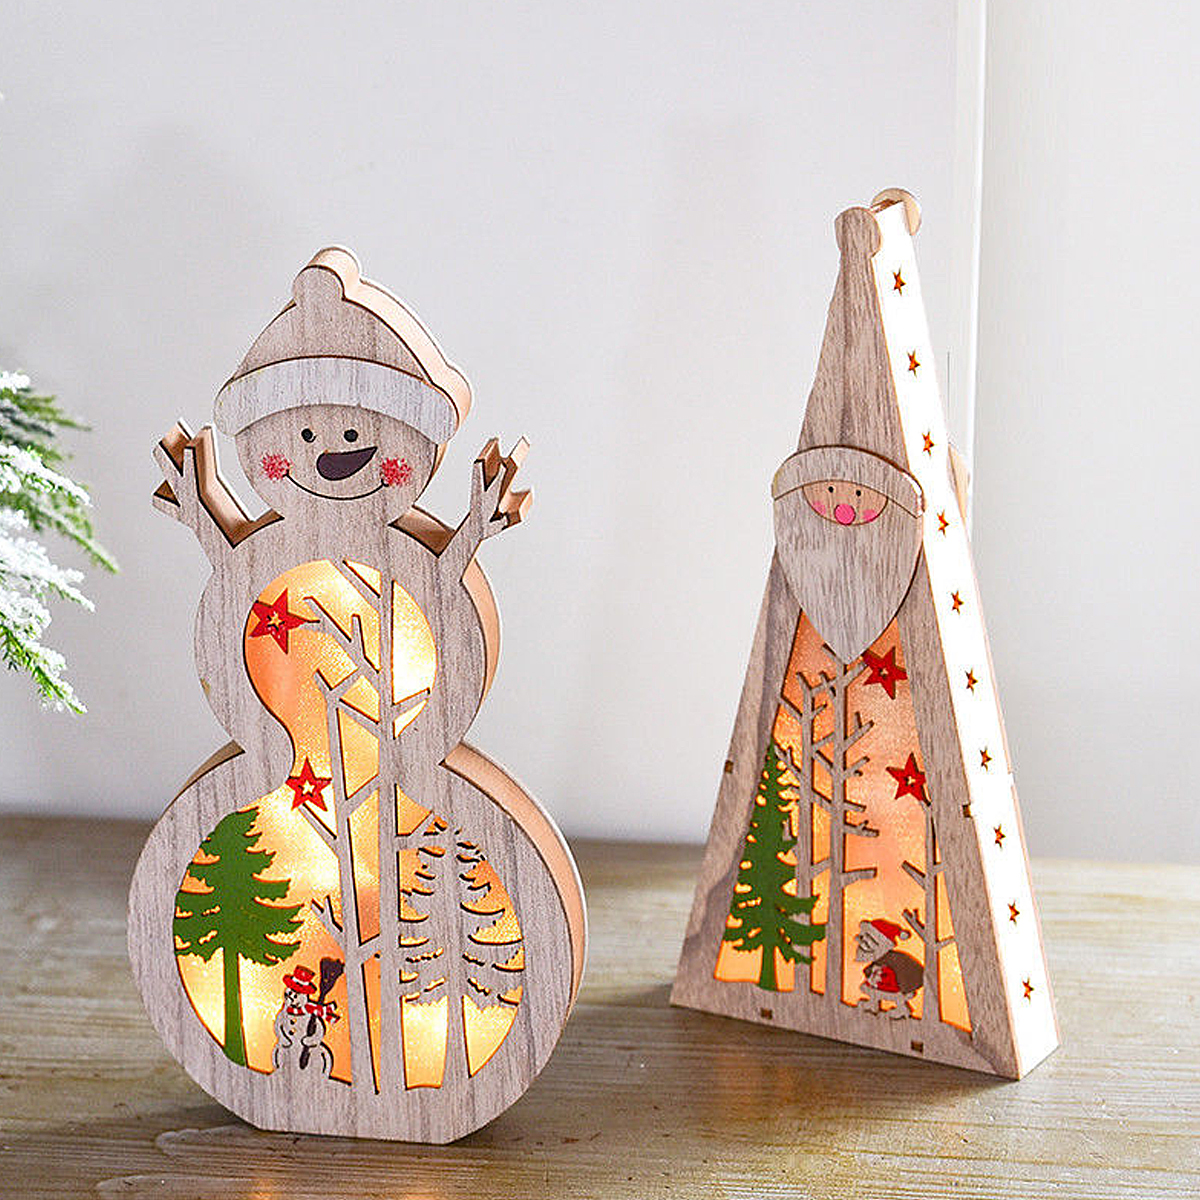 Festival-Wooden-LED-Christmas-Light-Display-Ornament-for-Christmas-Home-Table-Decorations-1403835-3